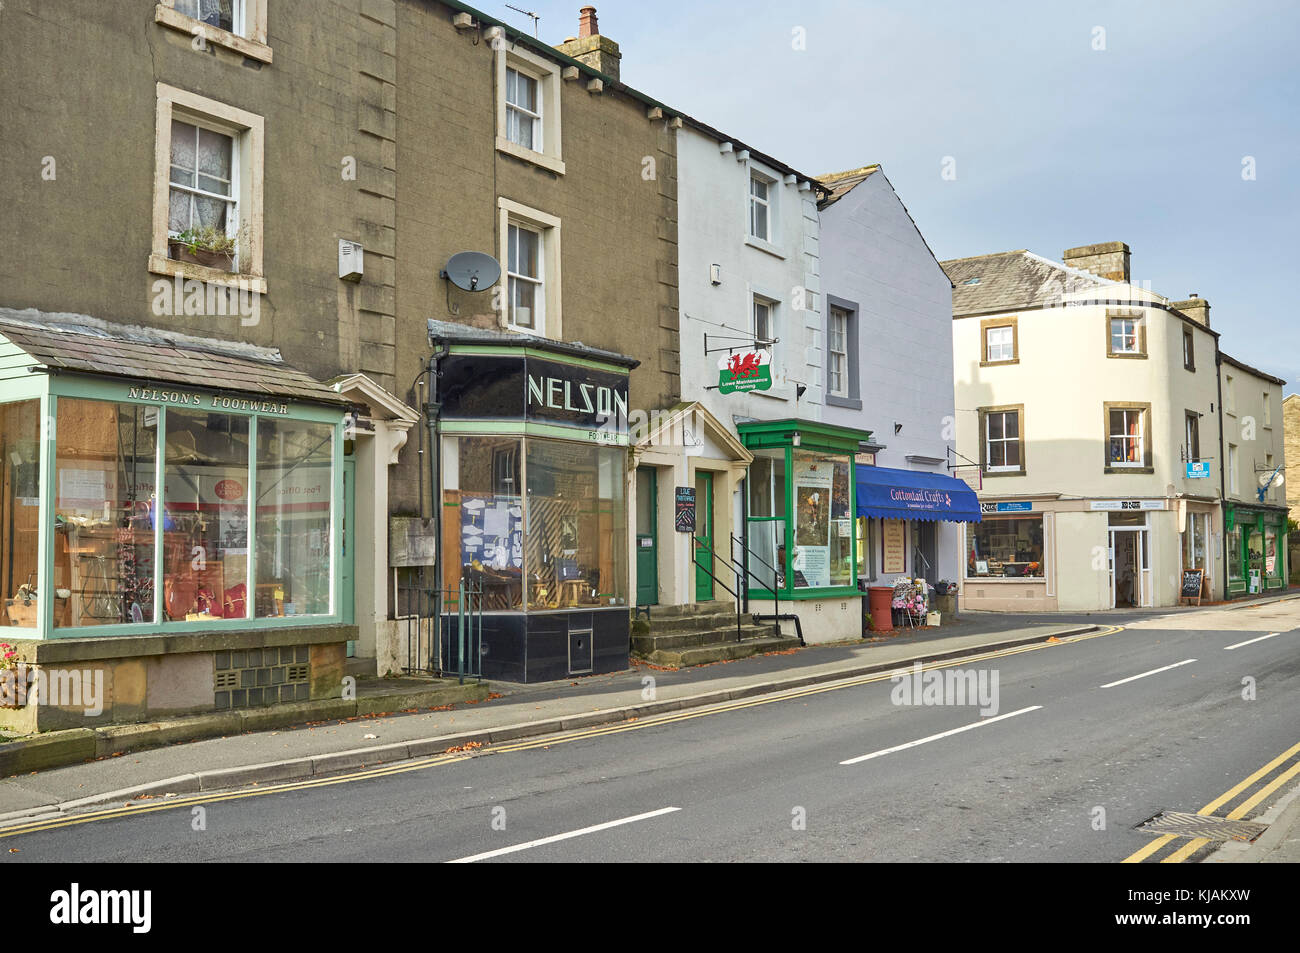 The famous Nelsons Cobbler in market town of Settle, Yorkshire Dales, Northern England, UK Stock Photo